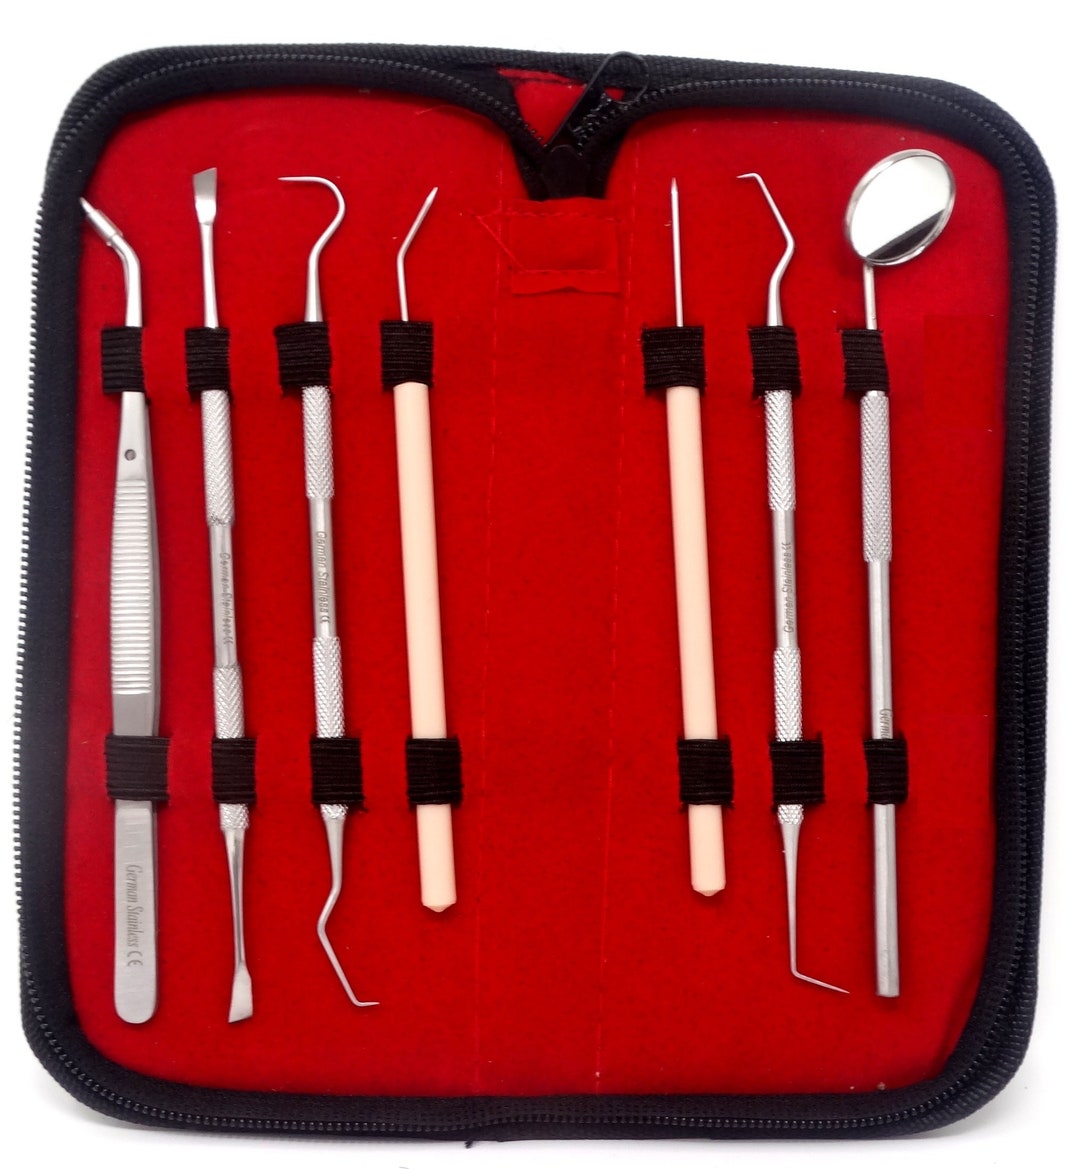 Stainless Steel Surgical Grade Dental Kit Floss Pick Scaler Tartar Plaque  Calculus Remover Teeth Scraper Dentist Oral Care Tools 7 Pc Set 